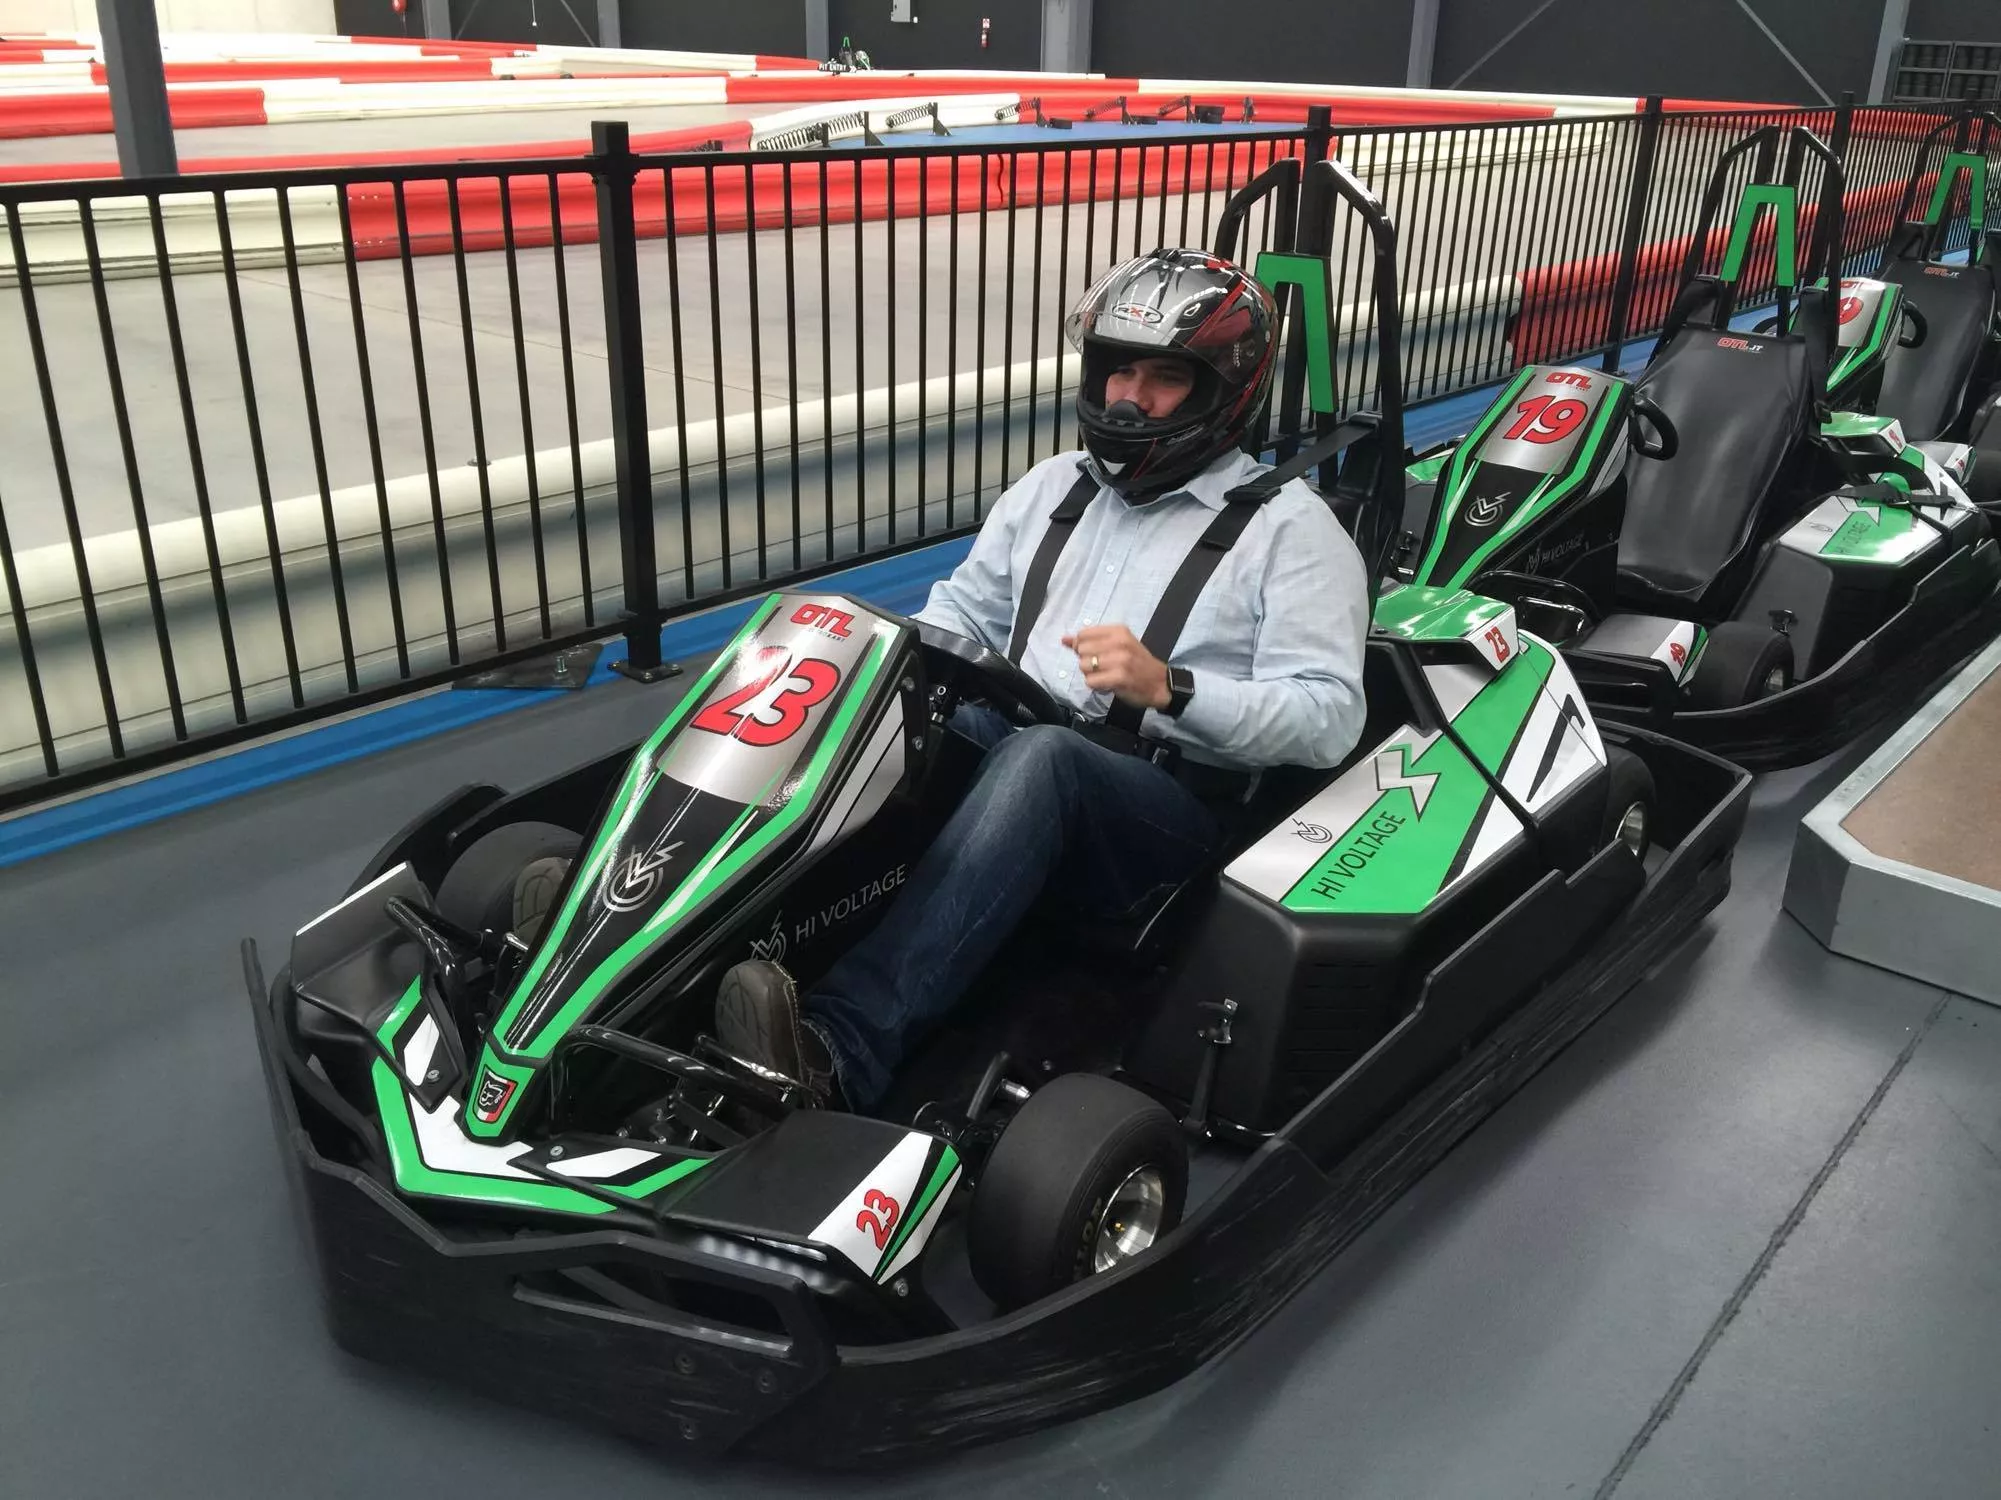 VMax Electric Indoor Karting in Romania, Europe | Karting - Rated 4.2